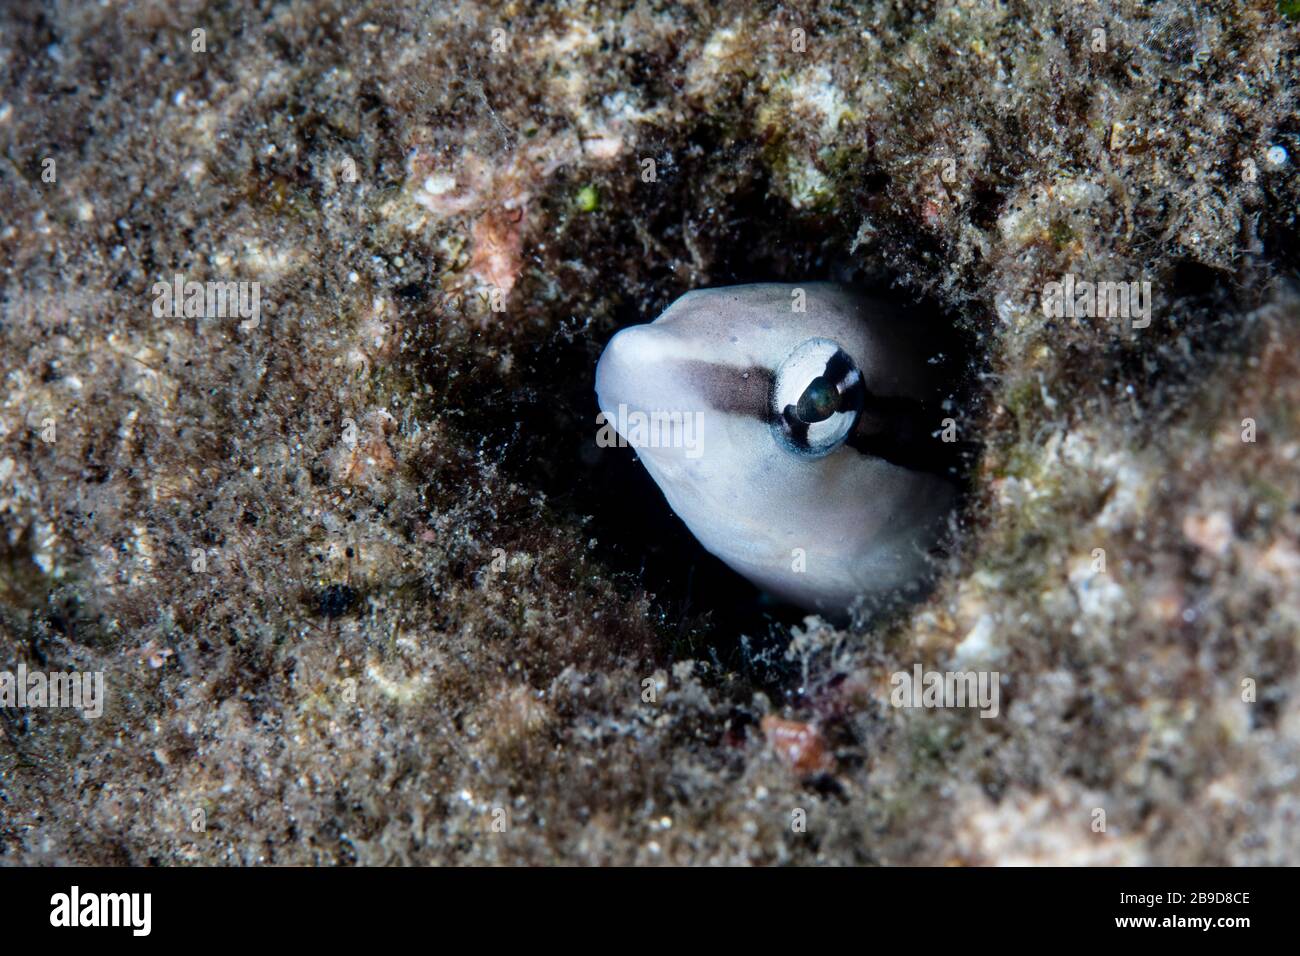 A false cleaner fangtooth blenny peers out from a worm hole on a reef. Stock Photo